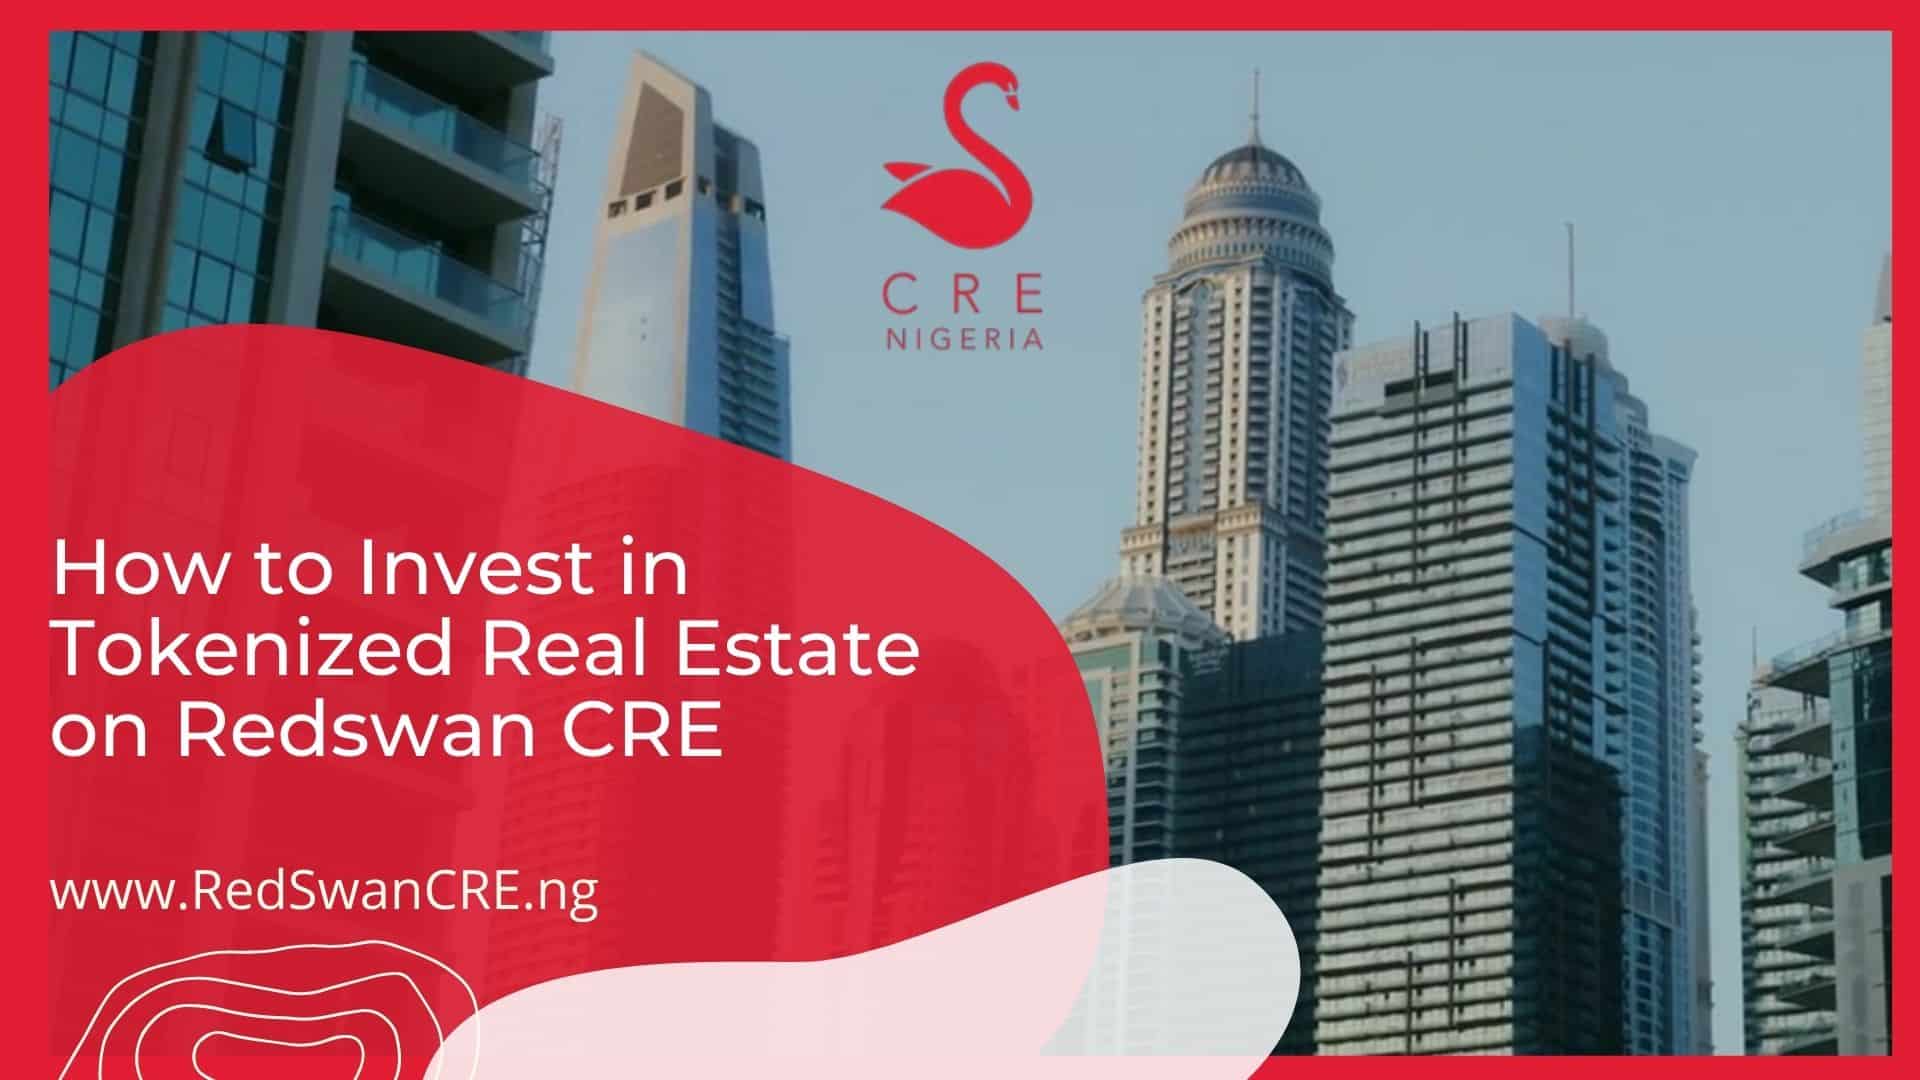 How to Invest in Tokenized Real Estate on RedSwan CRE